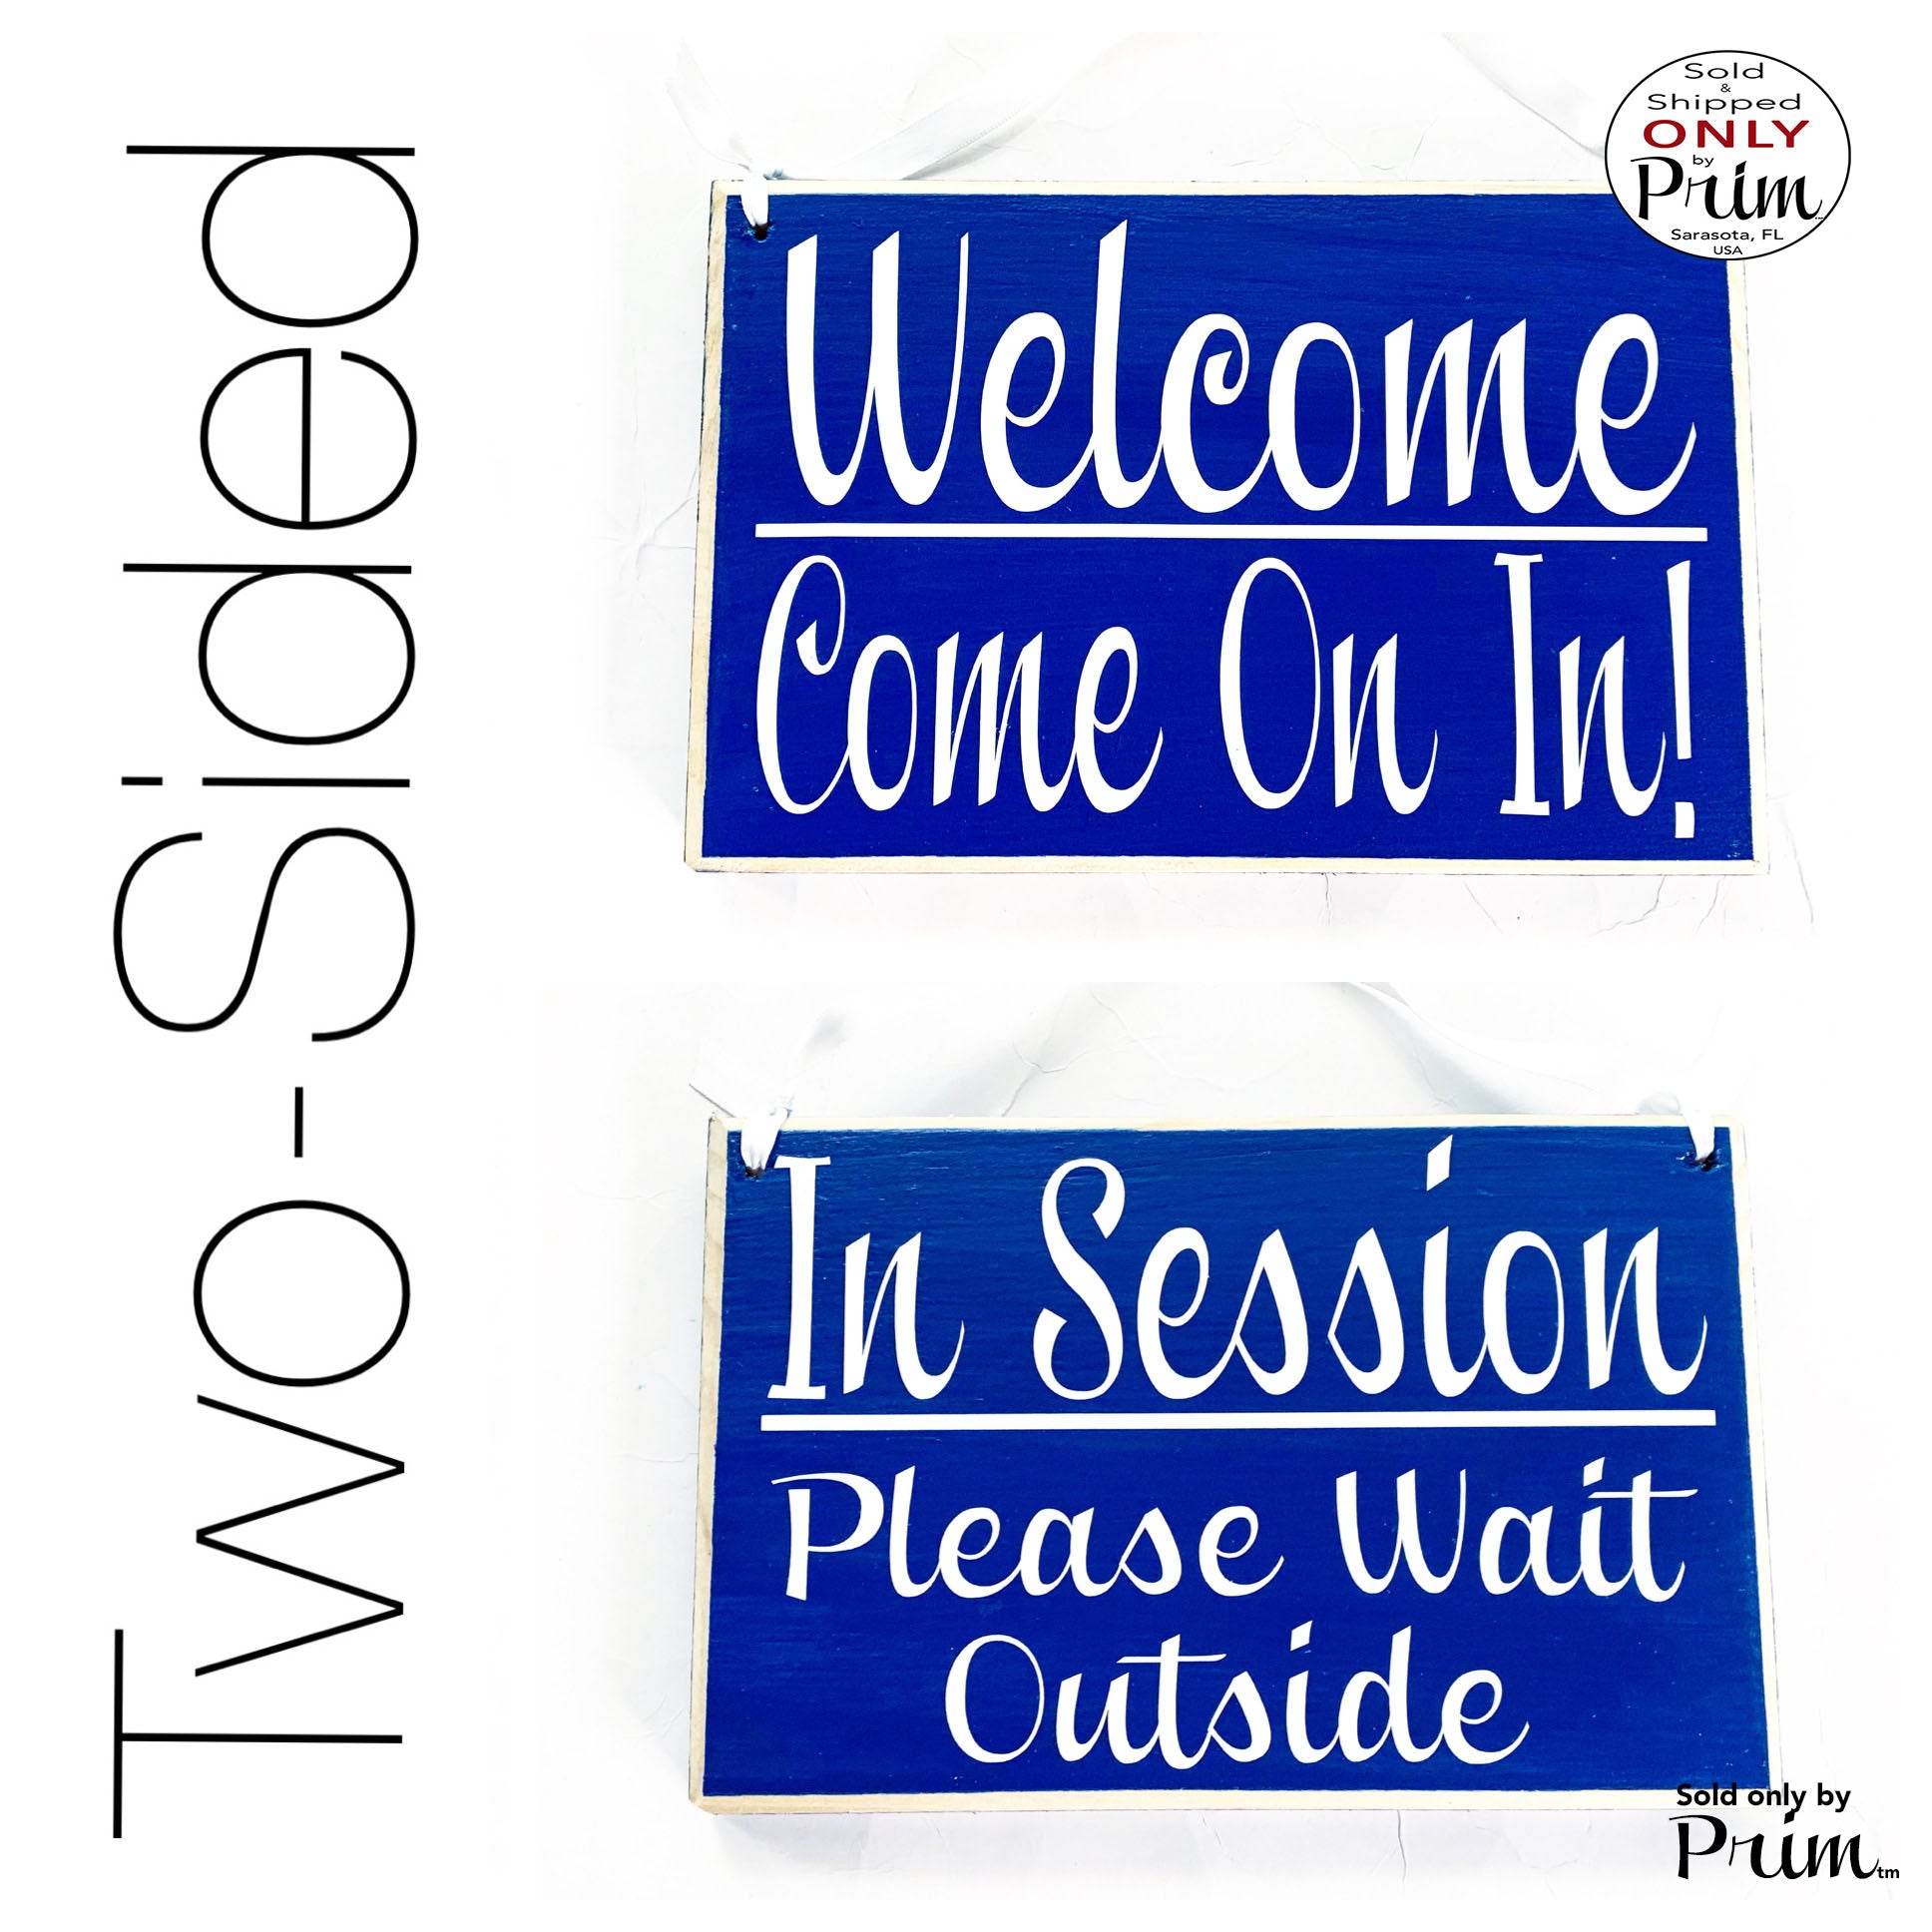 Designs by Prim Custom Wood Welcome Come On In In Session Please Wait Outside Meeting Waiting Room Sign 